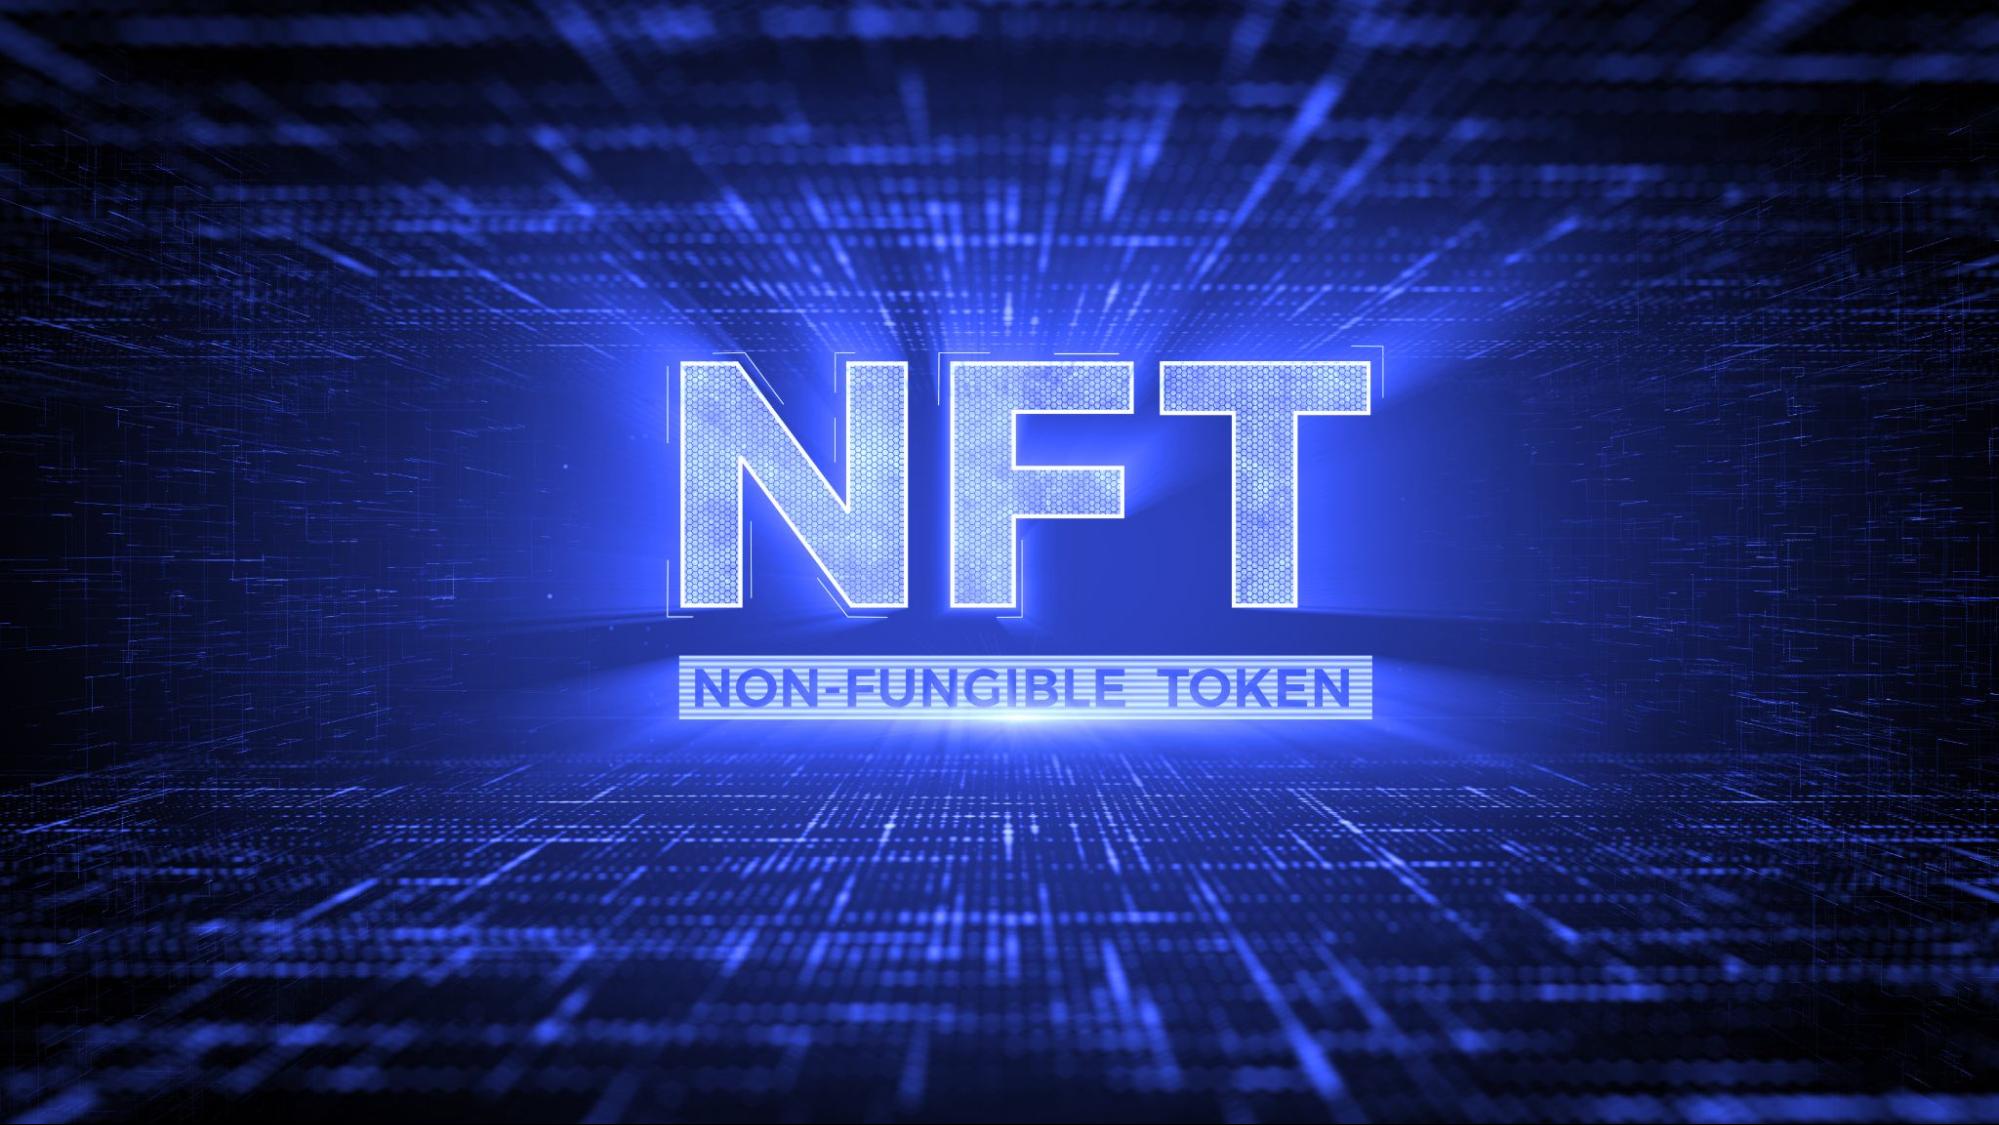 NFT technology can be implemented to improve companies' supply chains